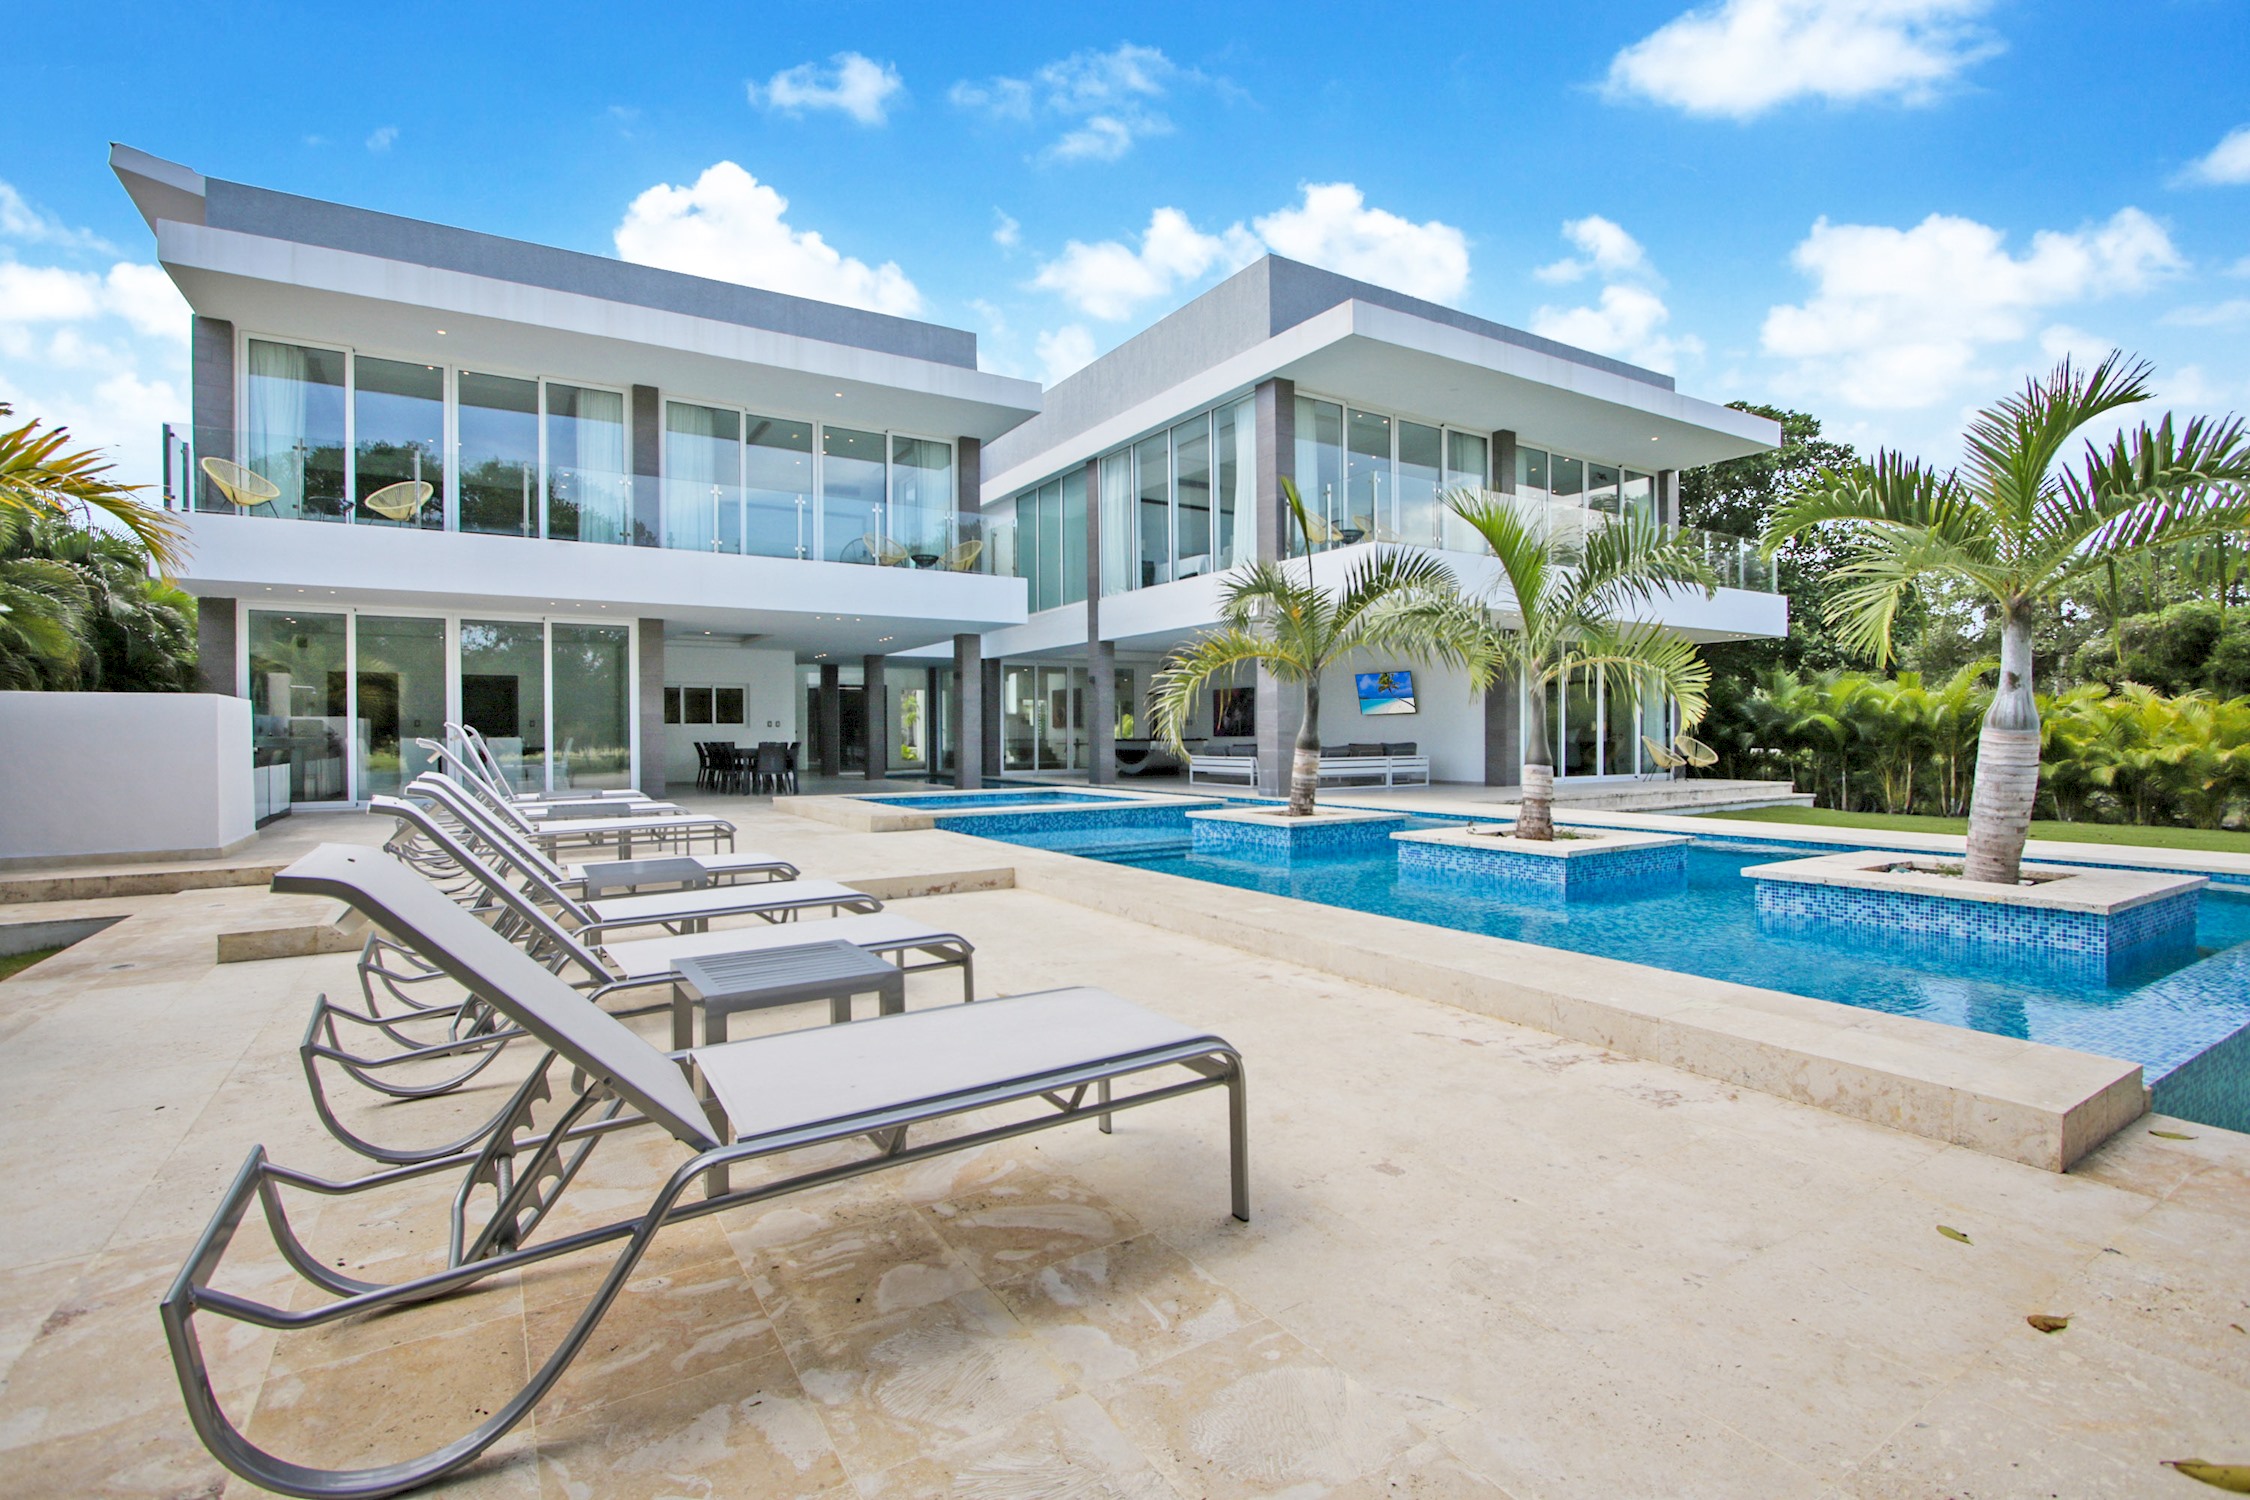 Villa Palma for rent in Punta Cana - Ultra modern villa with chef & maid  0